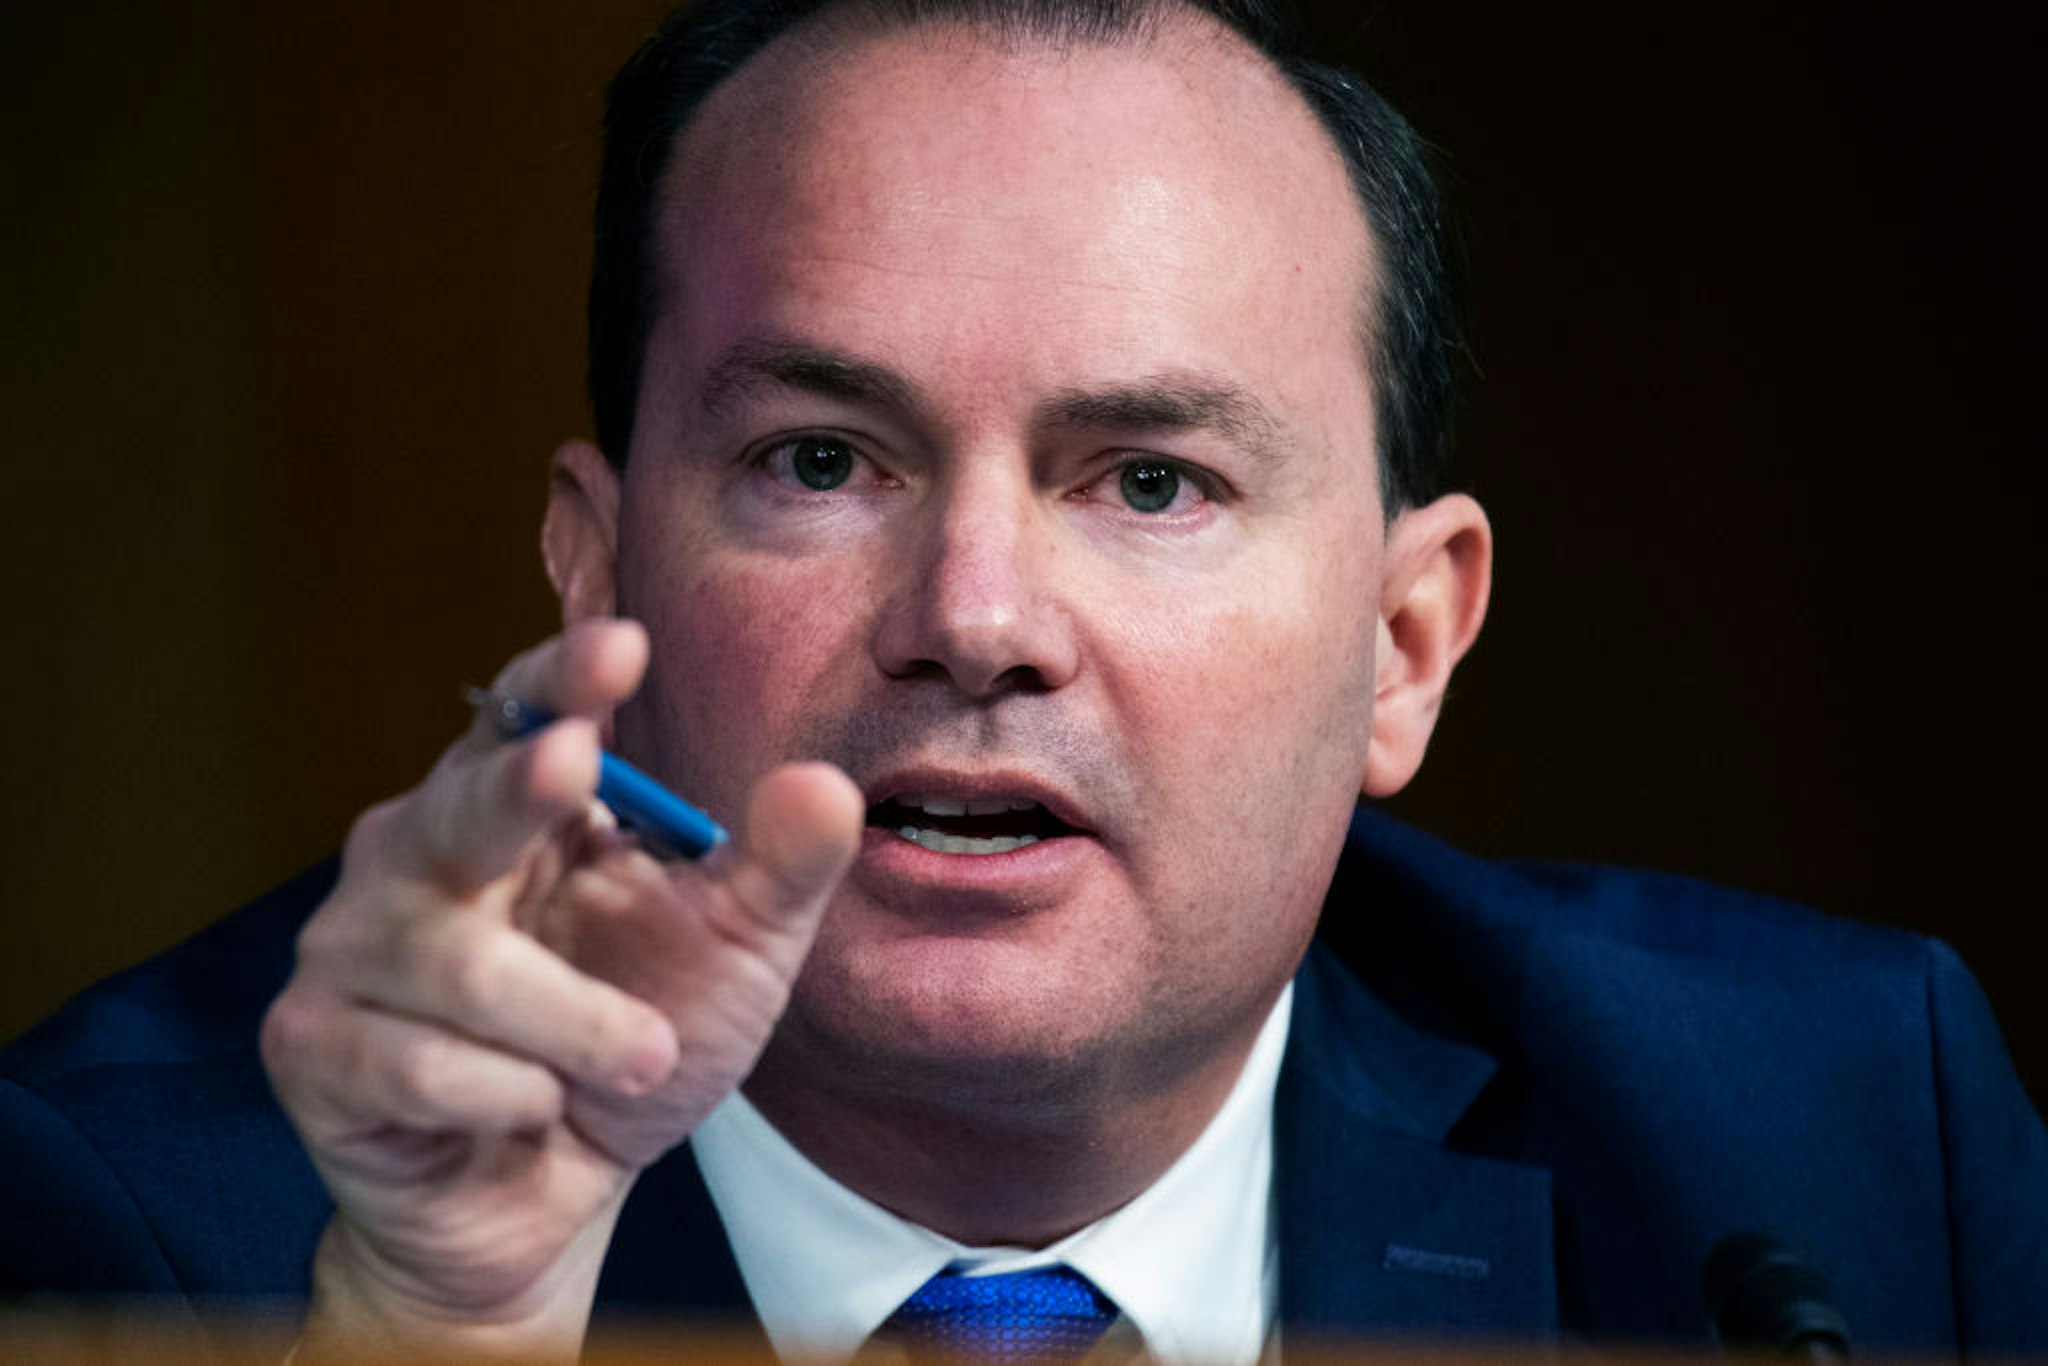 Sen. Mike Lee, R-Utah., questions Supreme Court justice nominee Amy Coney Barrett on the second day of her Senate Judiciary Committee confirmation hearing in Hart Senate Office Building on Tuesday, October 13, 2020.